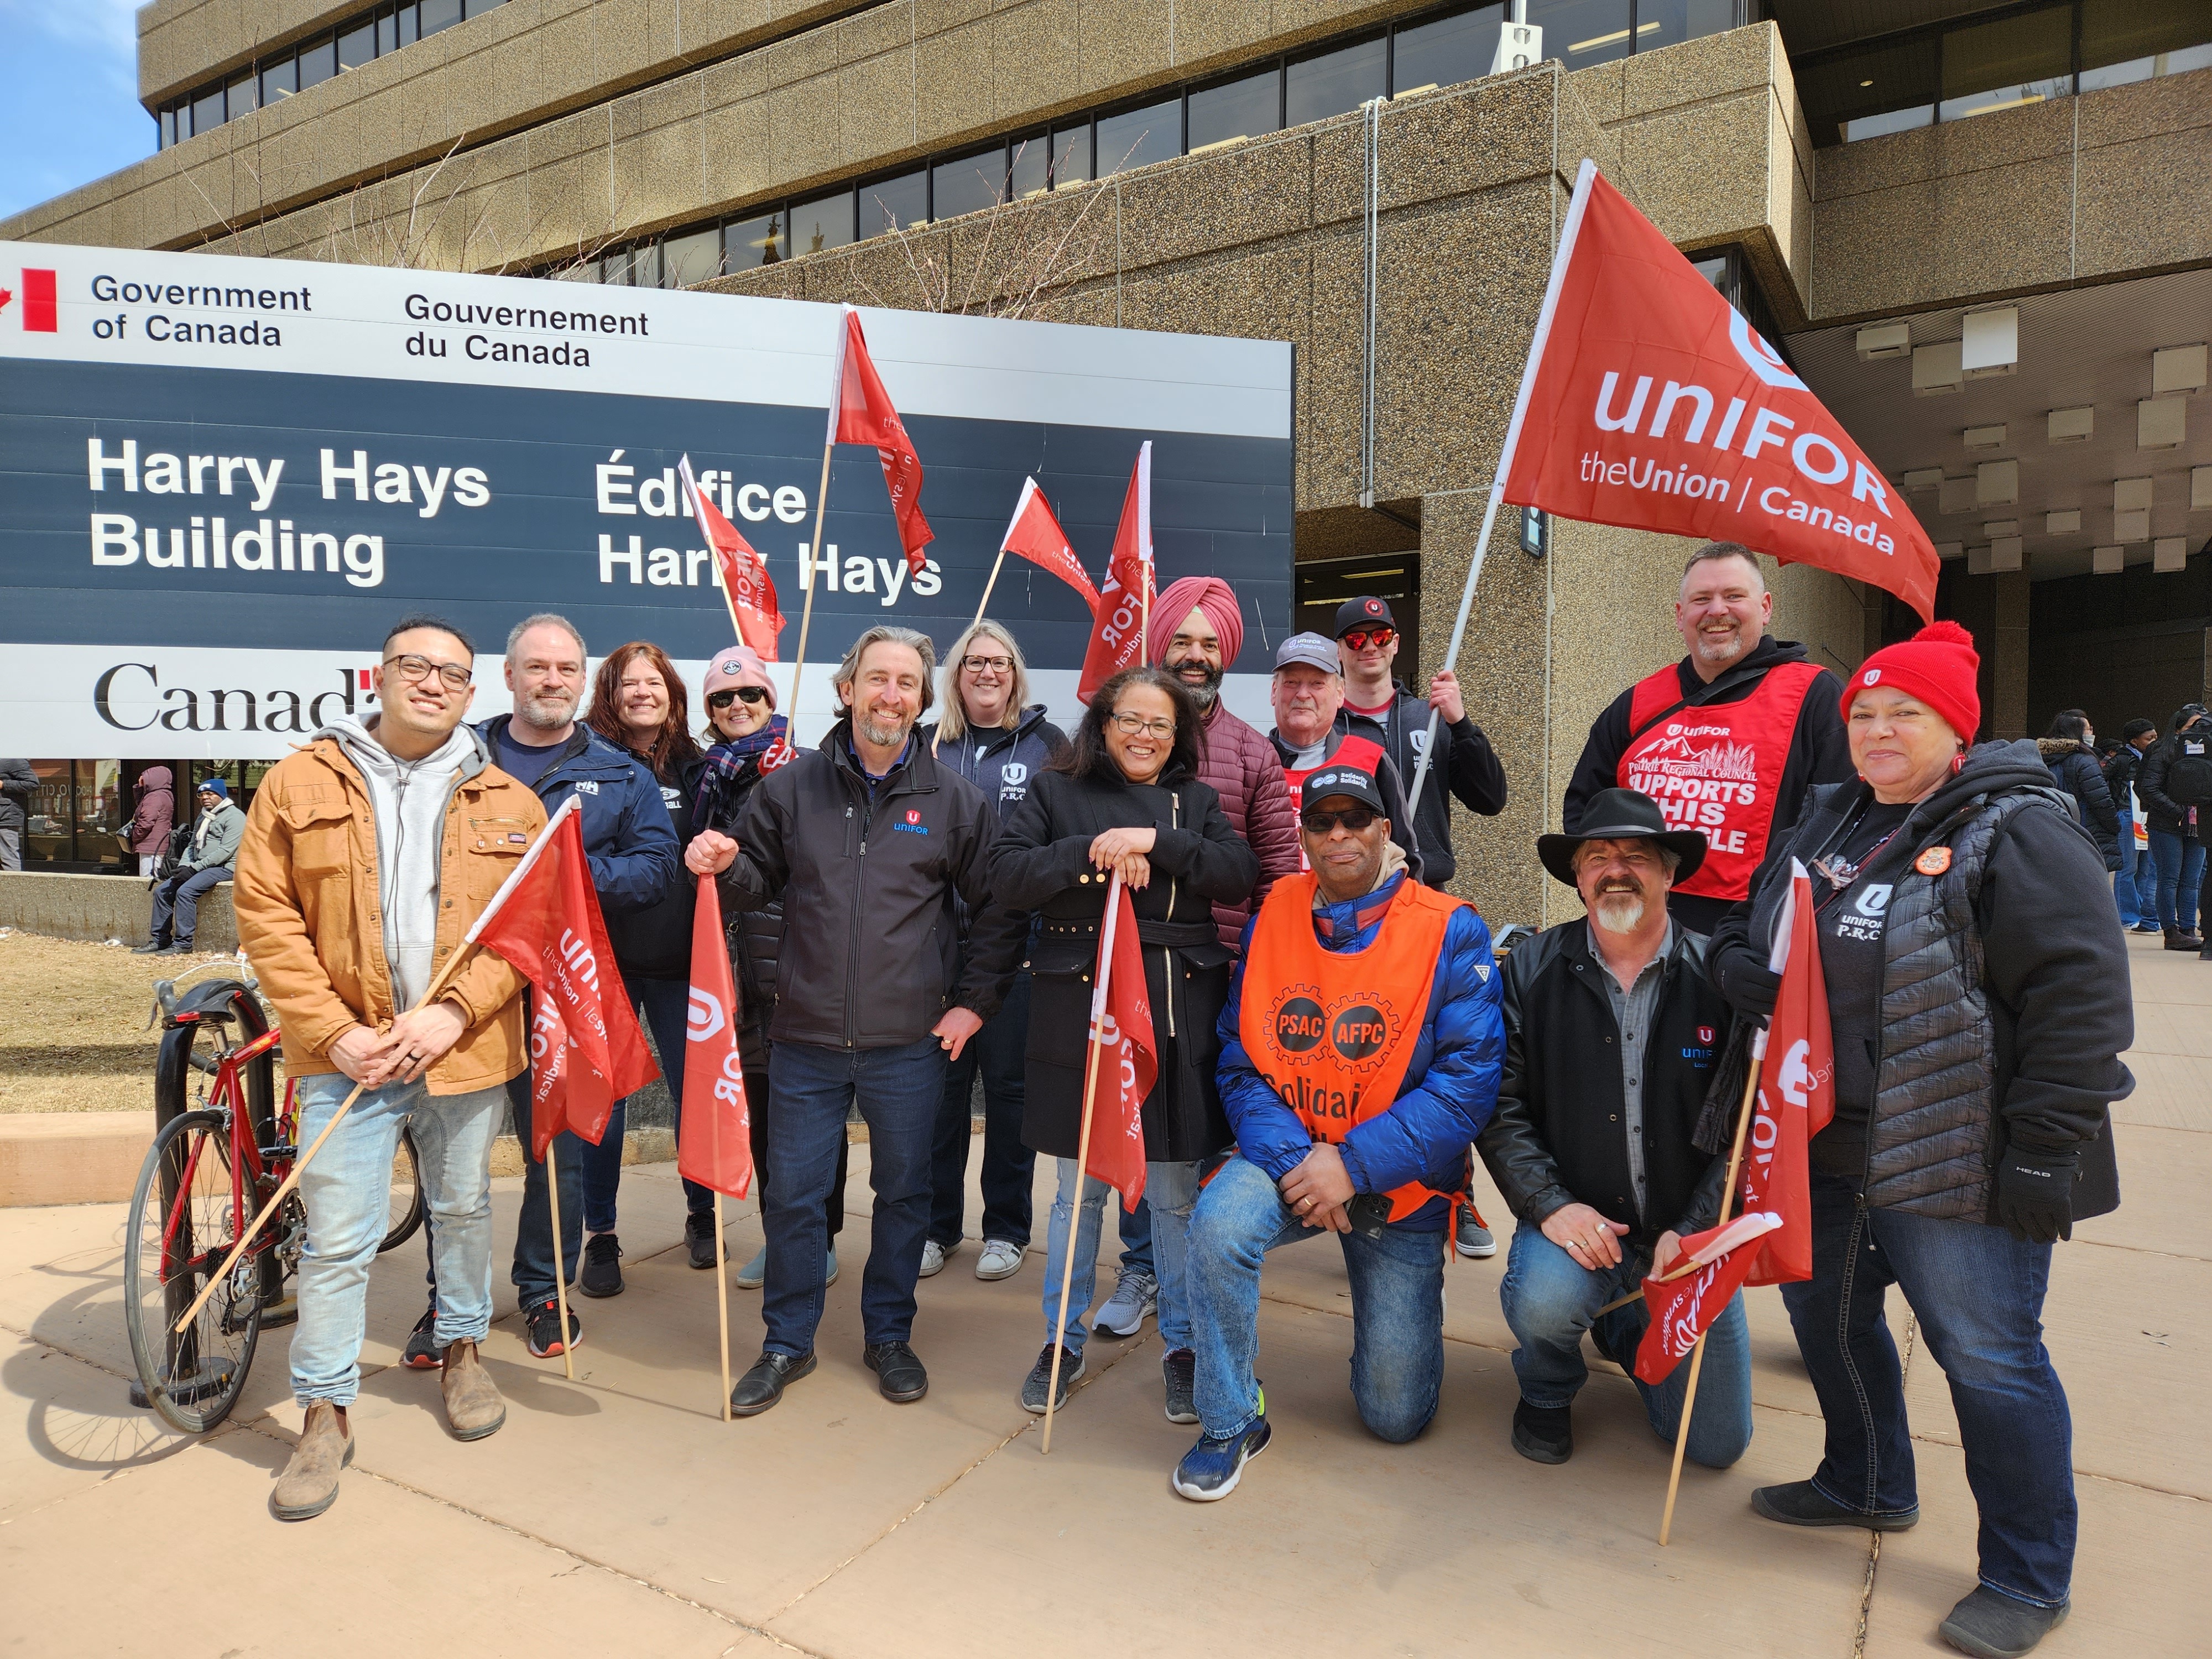 Unifor Leadership and BC members posing in front a government sign on the PSAC Picket Line